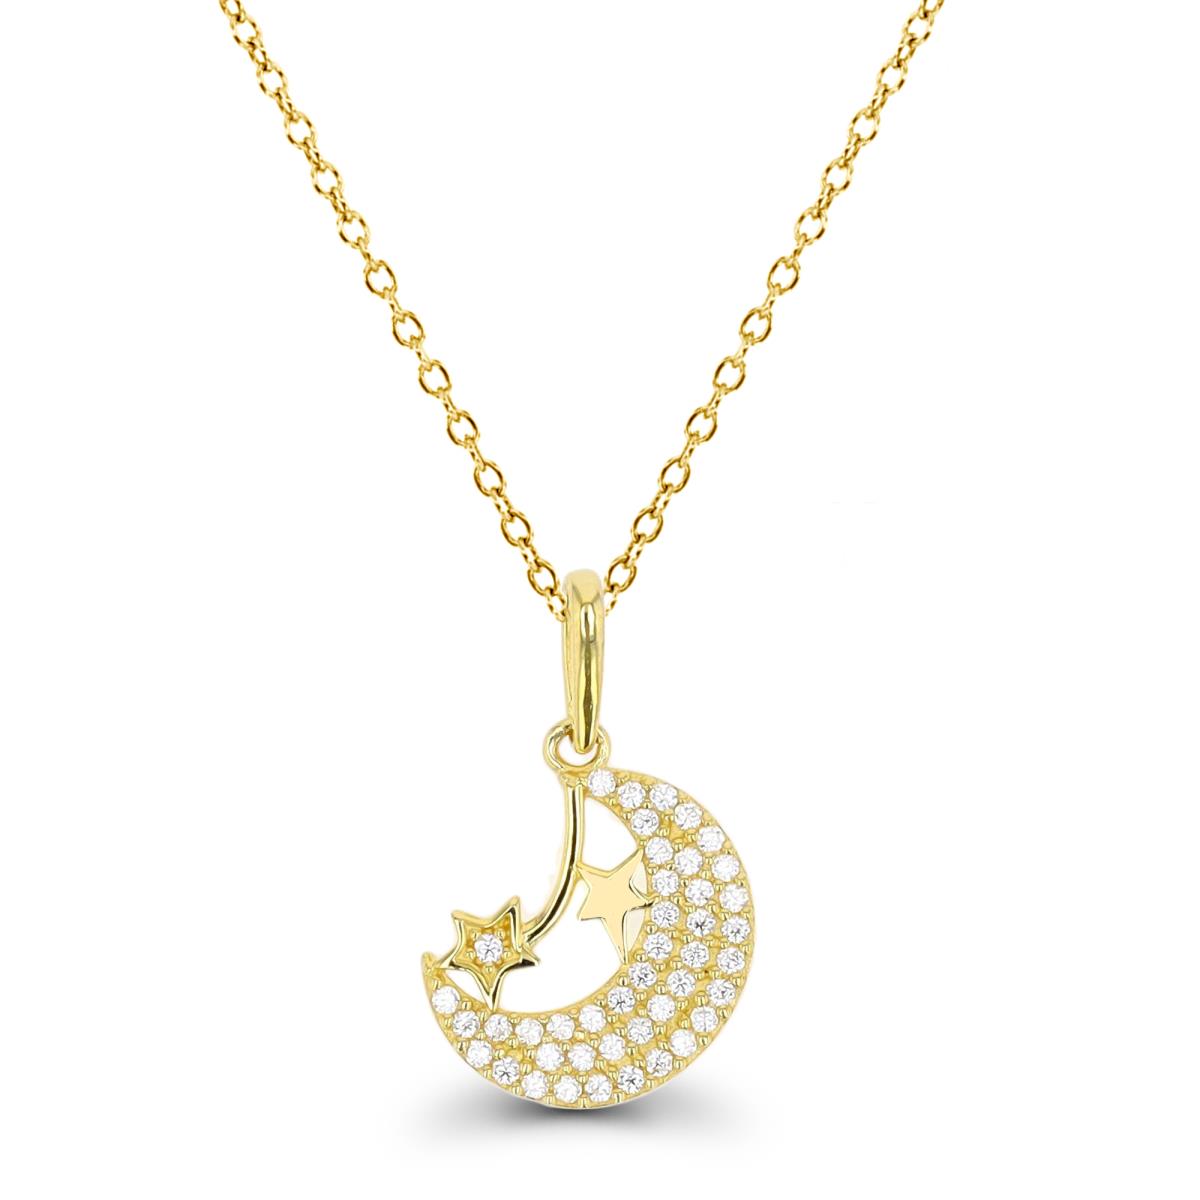 10K Yellow Gold Pave Crescent Moon 18" Necklace